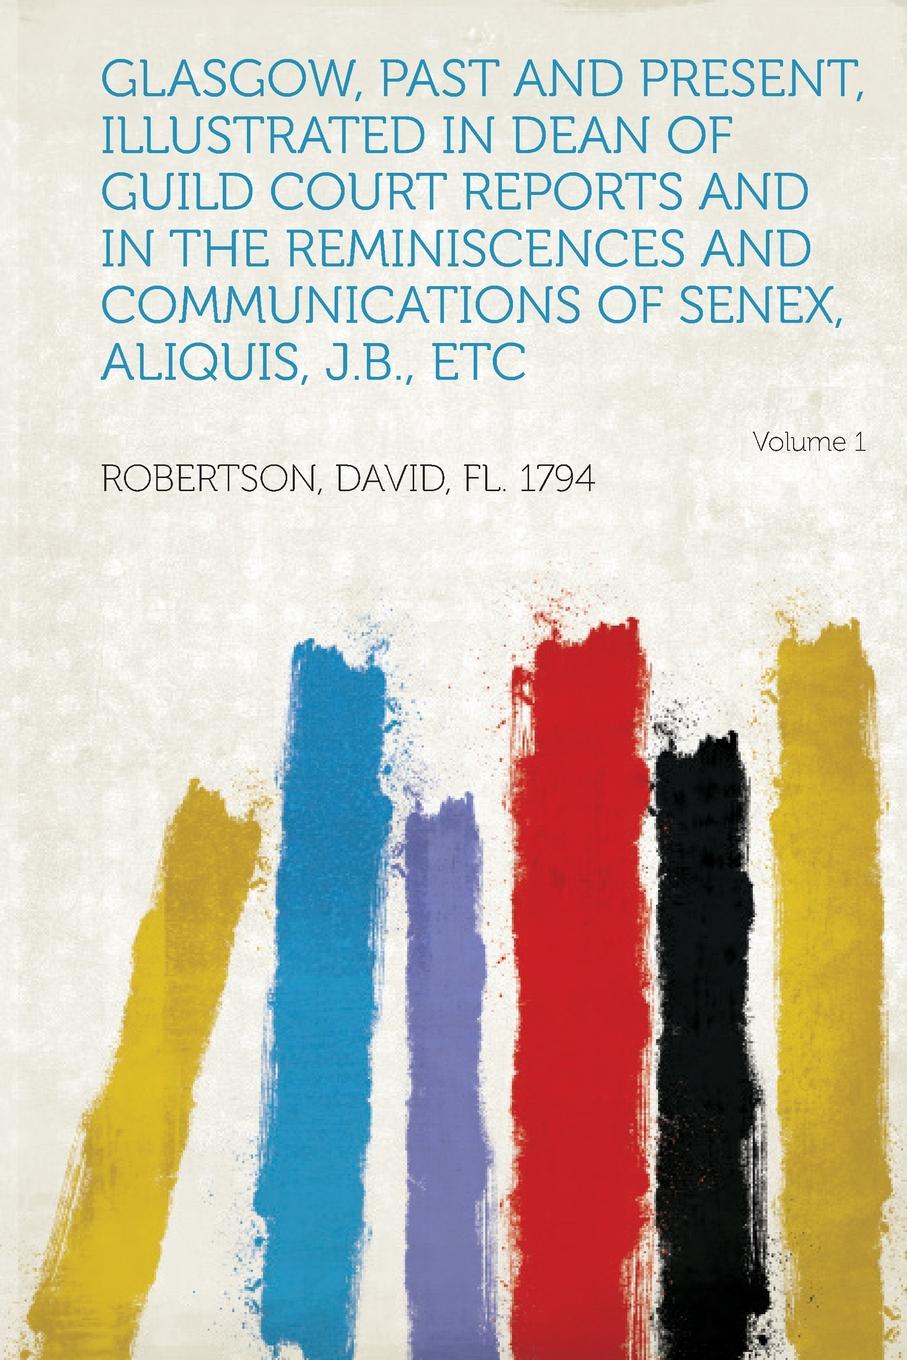 Glasgow, Past and Present, Illustrated in Dean of Guild Court Reports and in the Reminiscences and Communications of Senex, Aliquis, J.B., Etc Volume